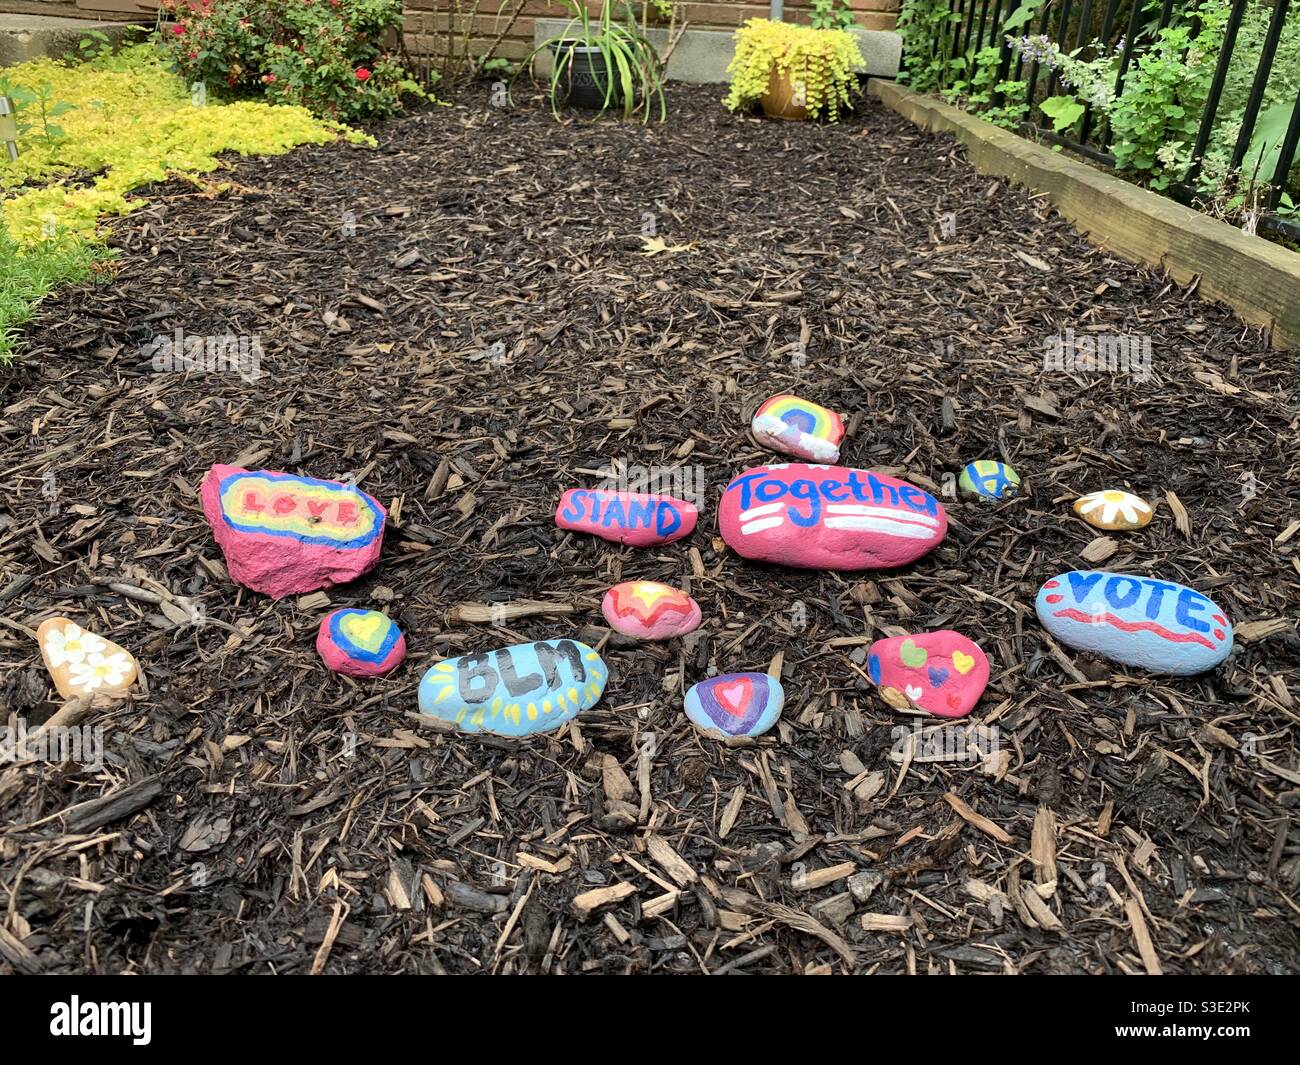 Rocks painted with encouraging messages Stock Photo